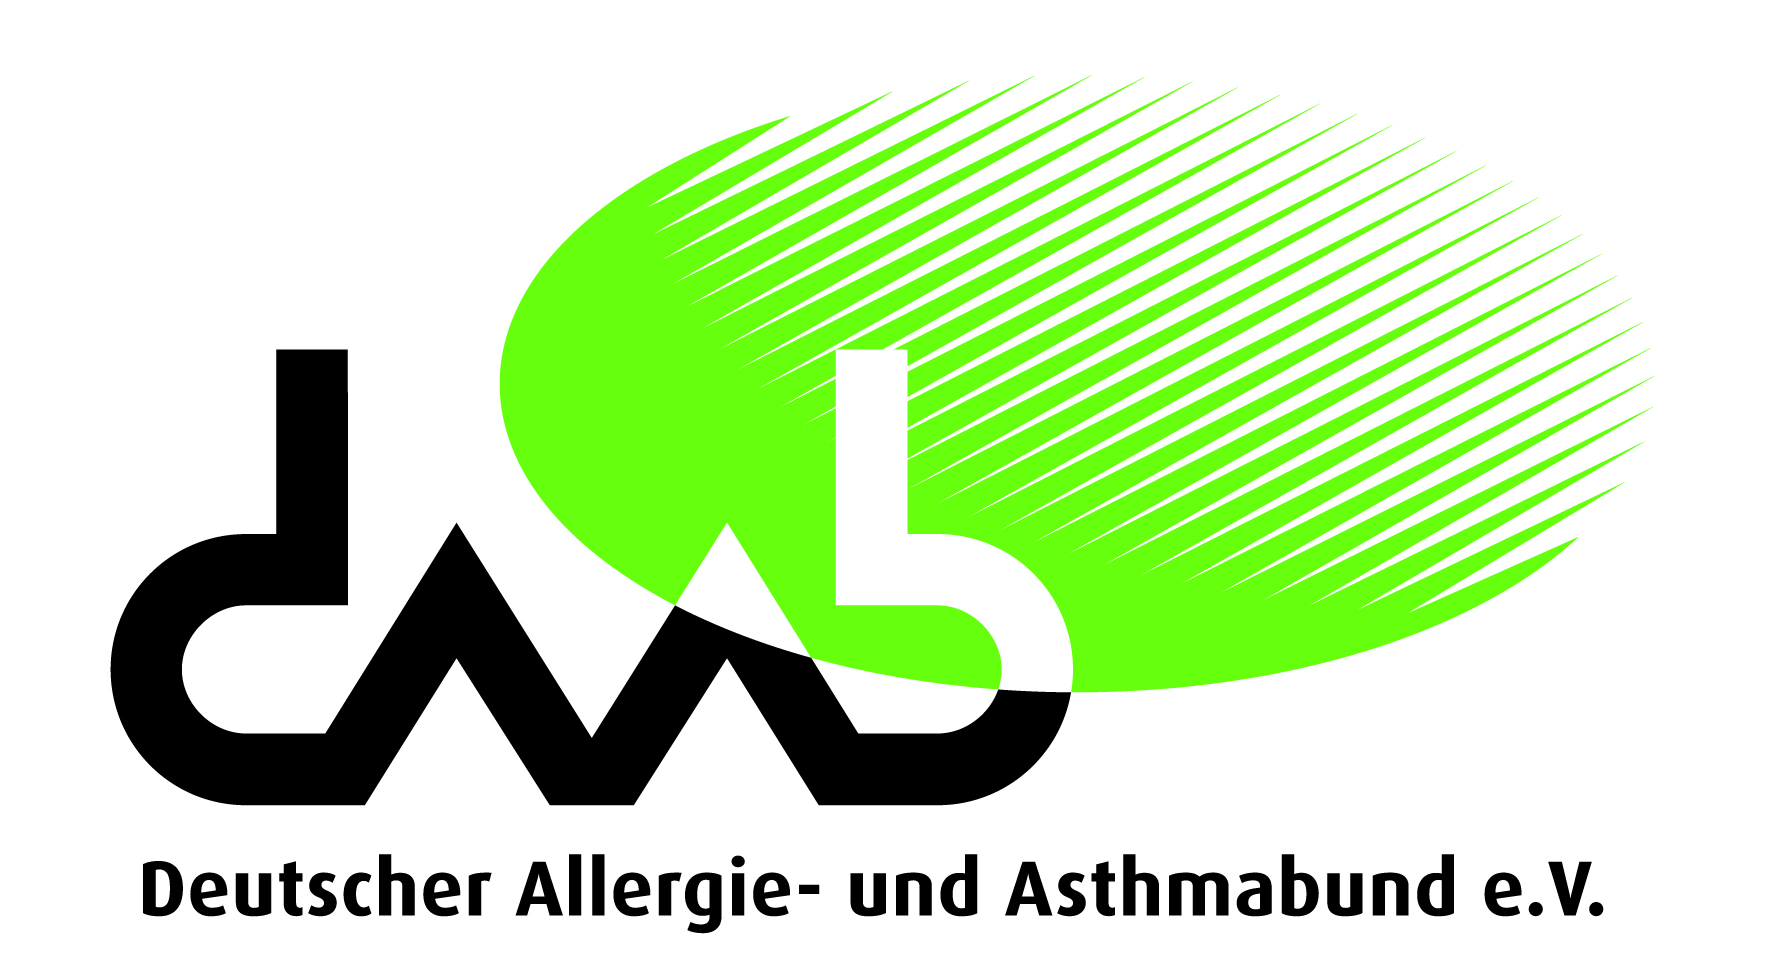 GERMAN ALLEGRY AND ASTHMA ASSOCIATION